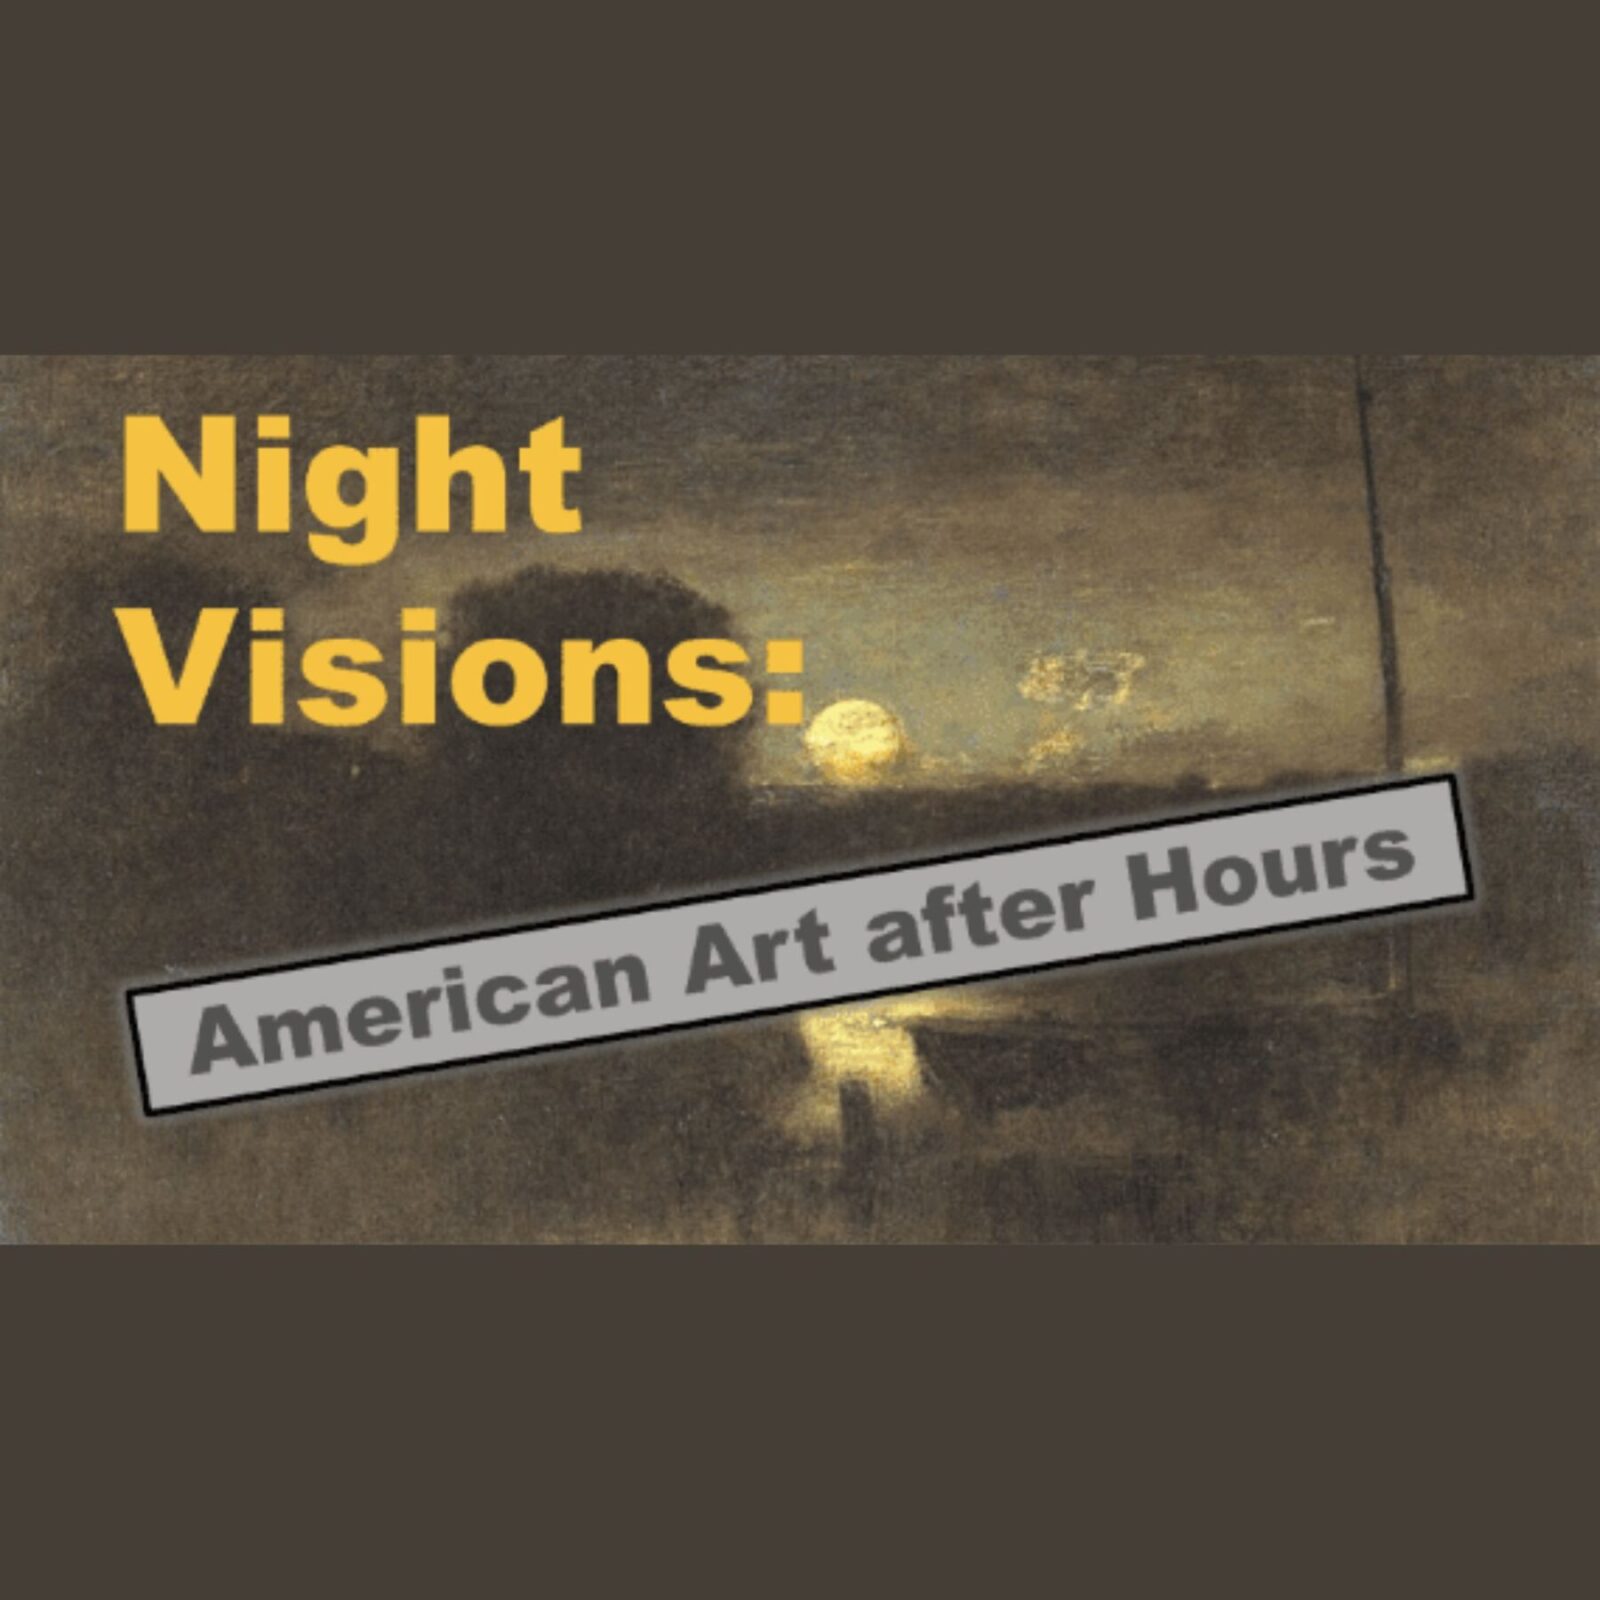 Lunchtime Gallery Series. Night Visions: American Art after Hours